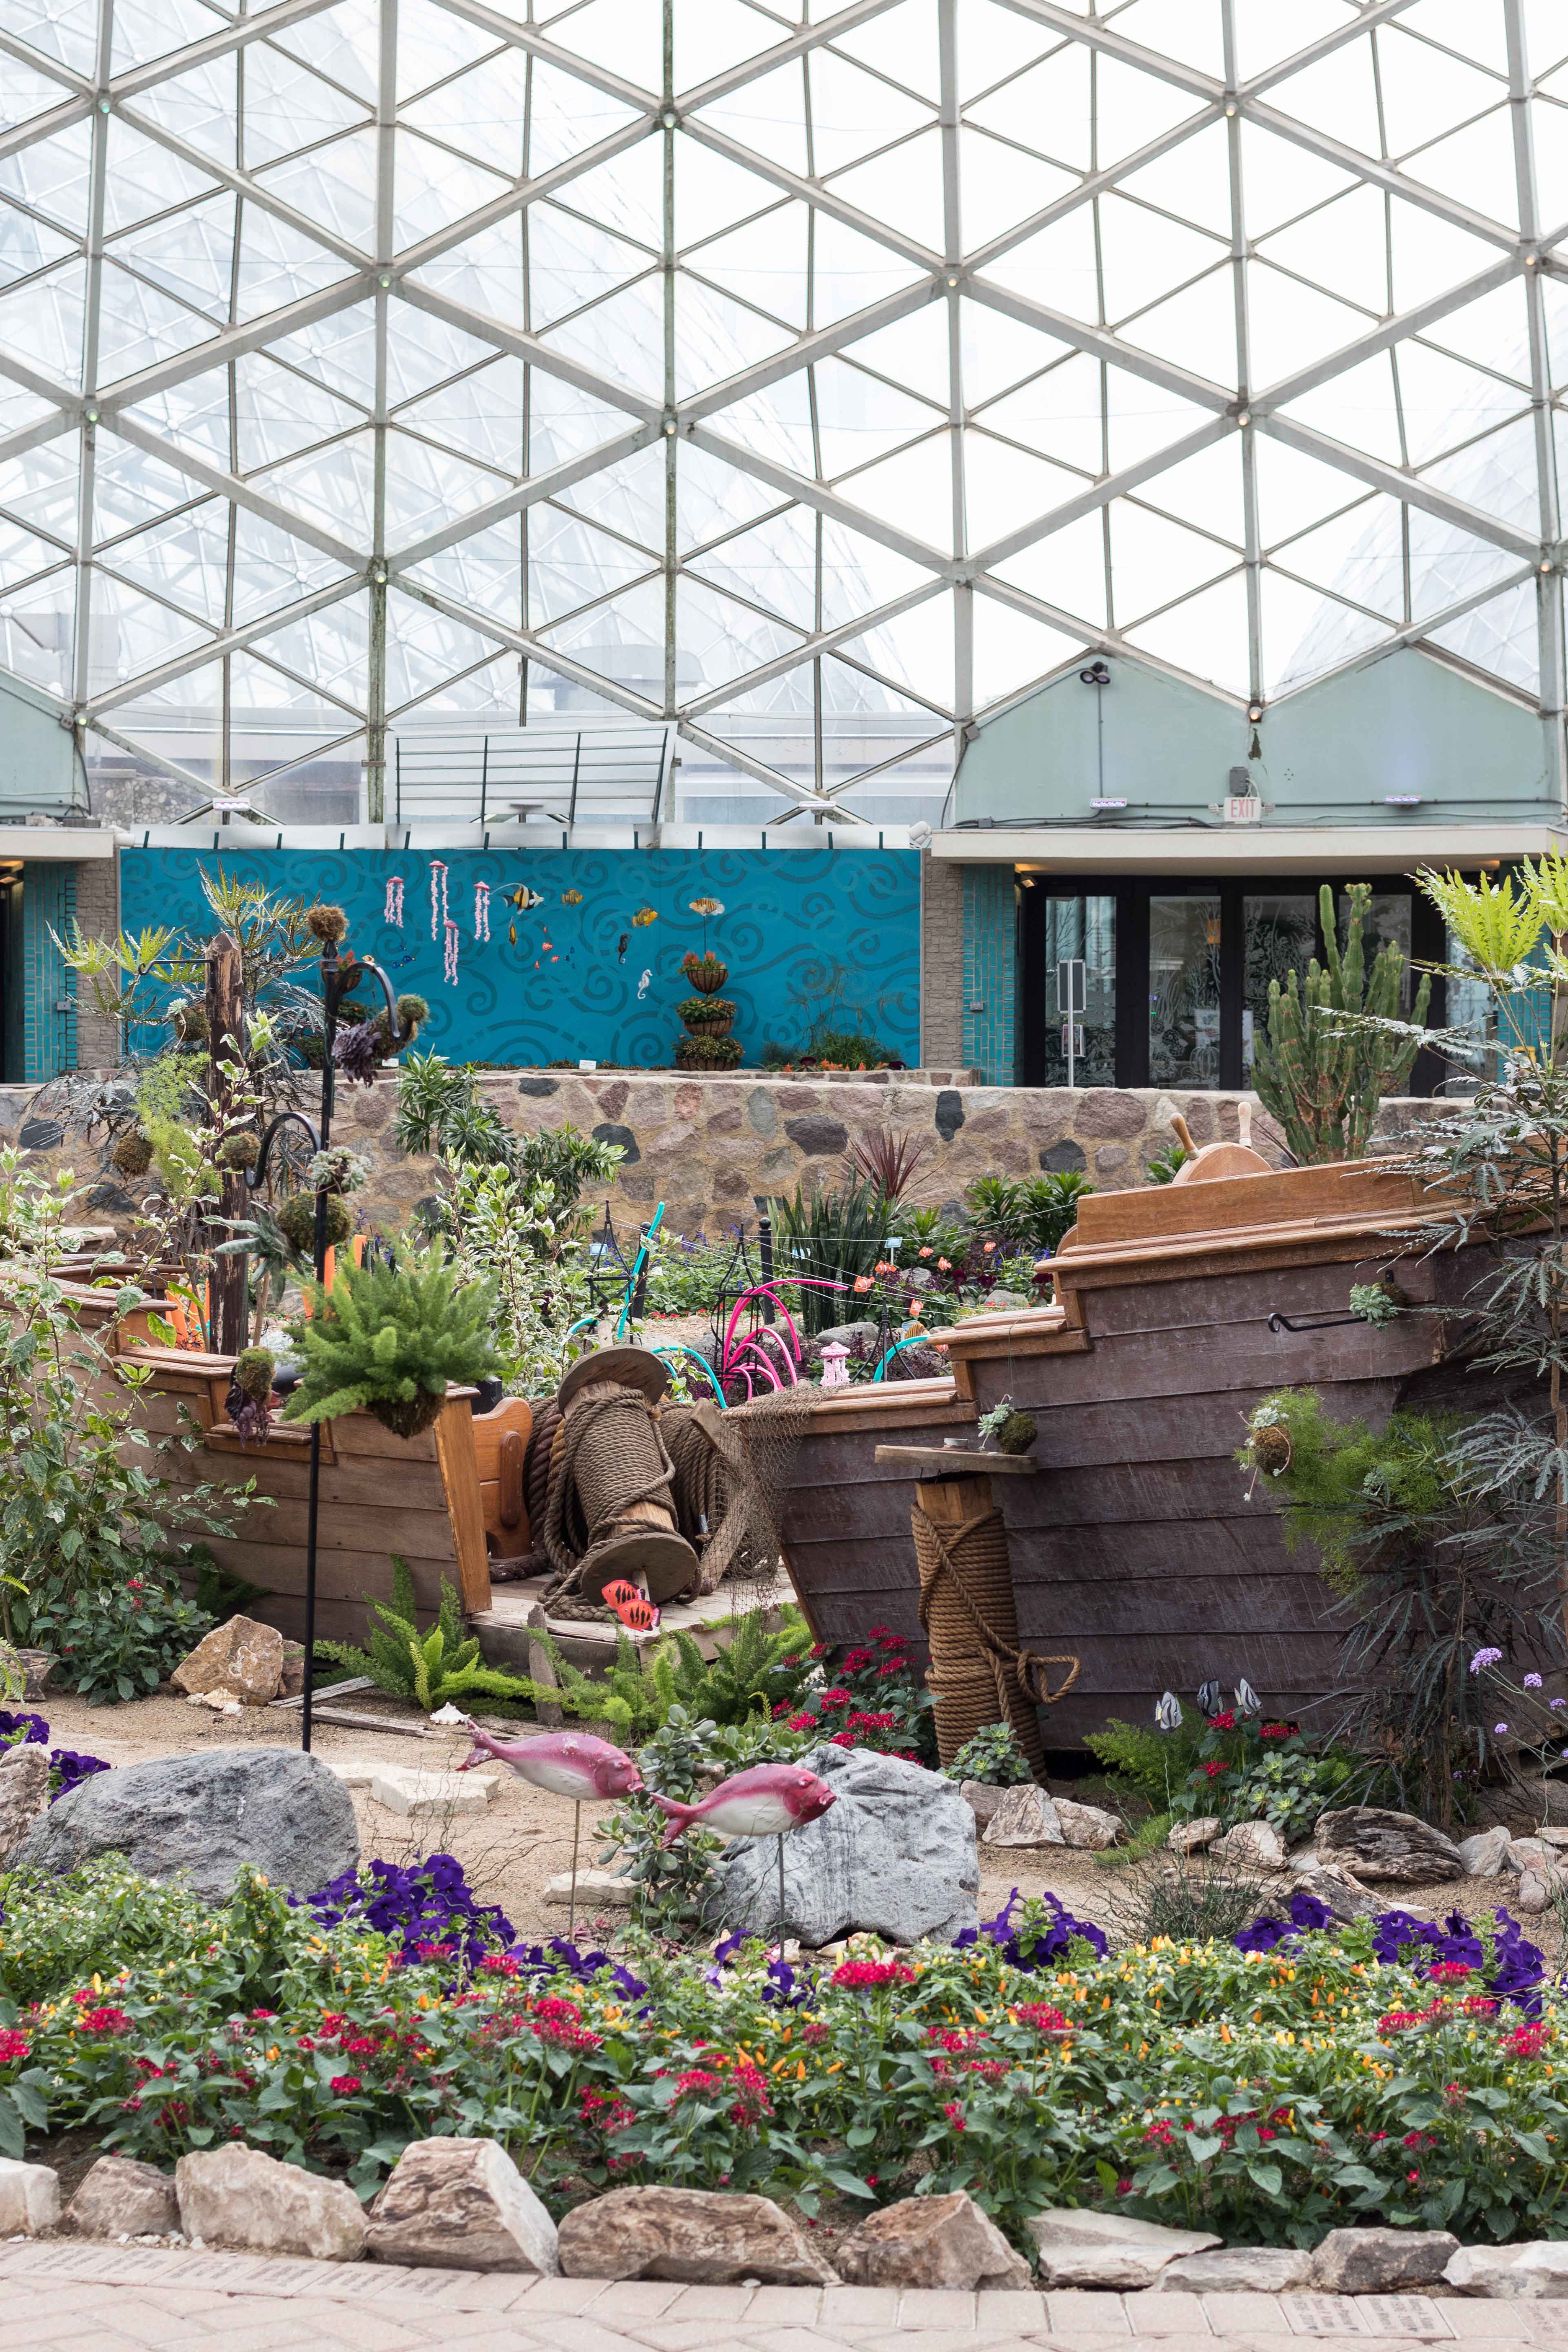 Under the Sea Summer Floral Show at the Mitchell Park Domes #MitchellParkDomes #MilwaukeeWI #floralshow #UndertheSea | https://www.roseclearfield.com